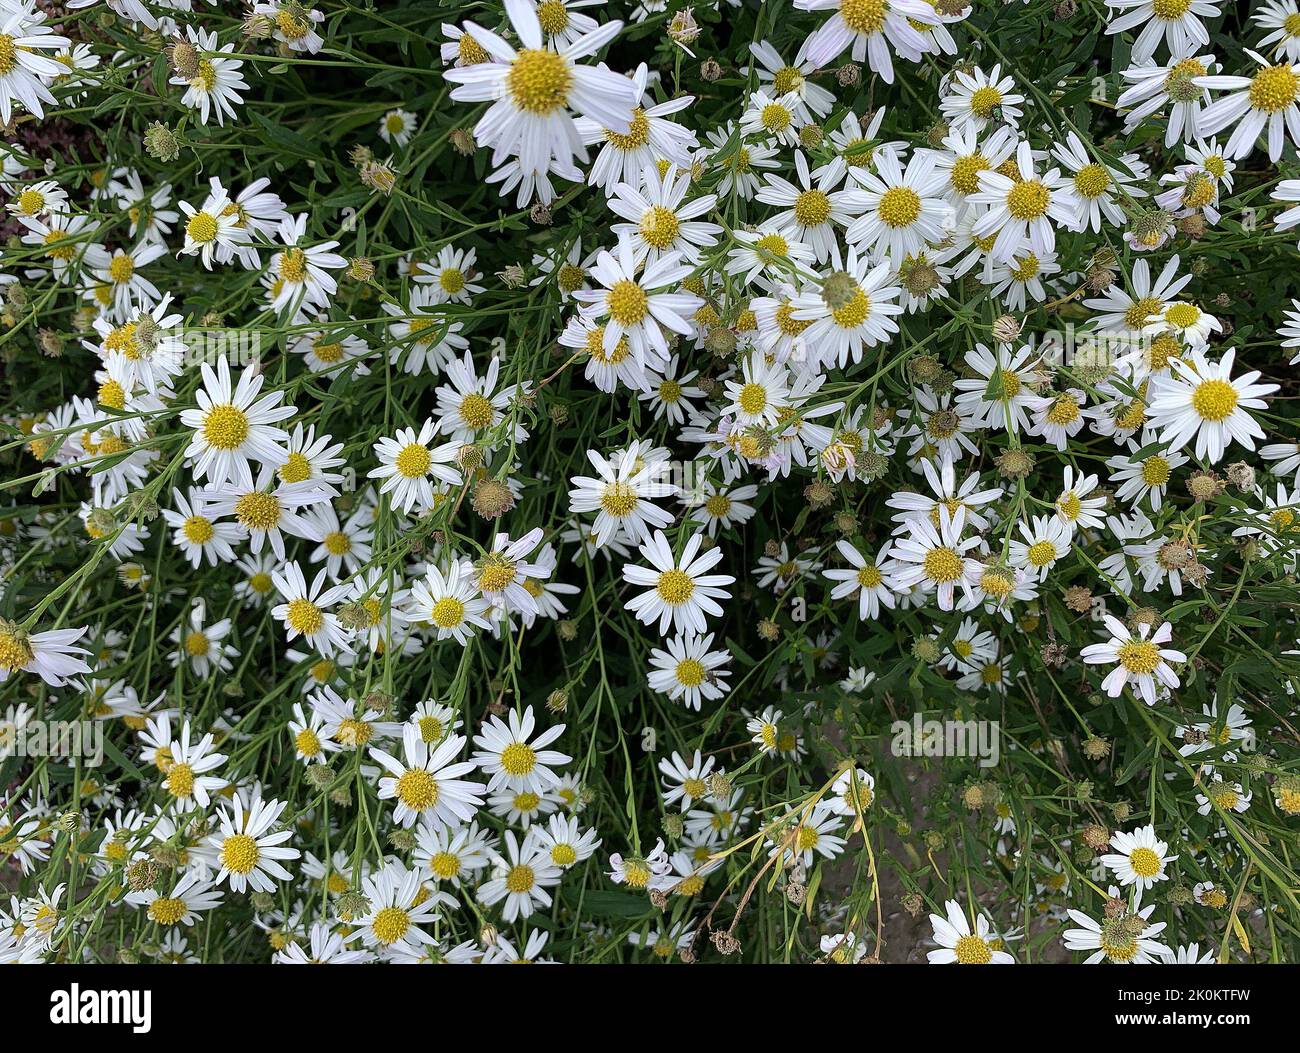 Close up of the garden plant kalimeris incisa alba seen outdoors in the UK in summer. Stock Photo